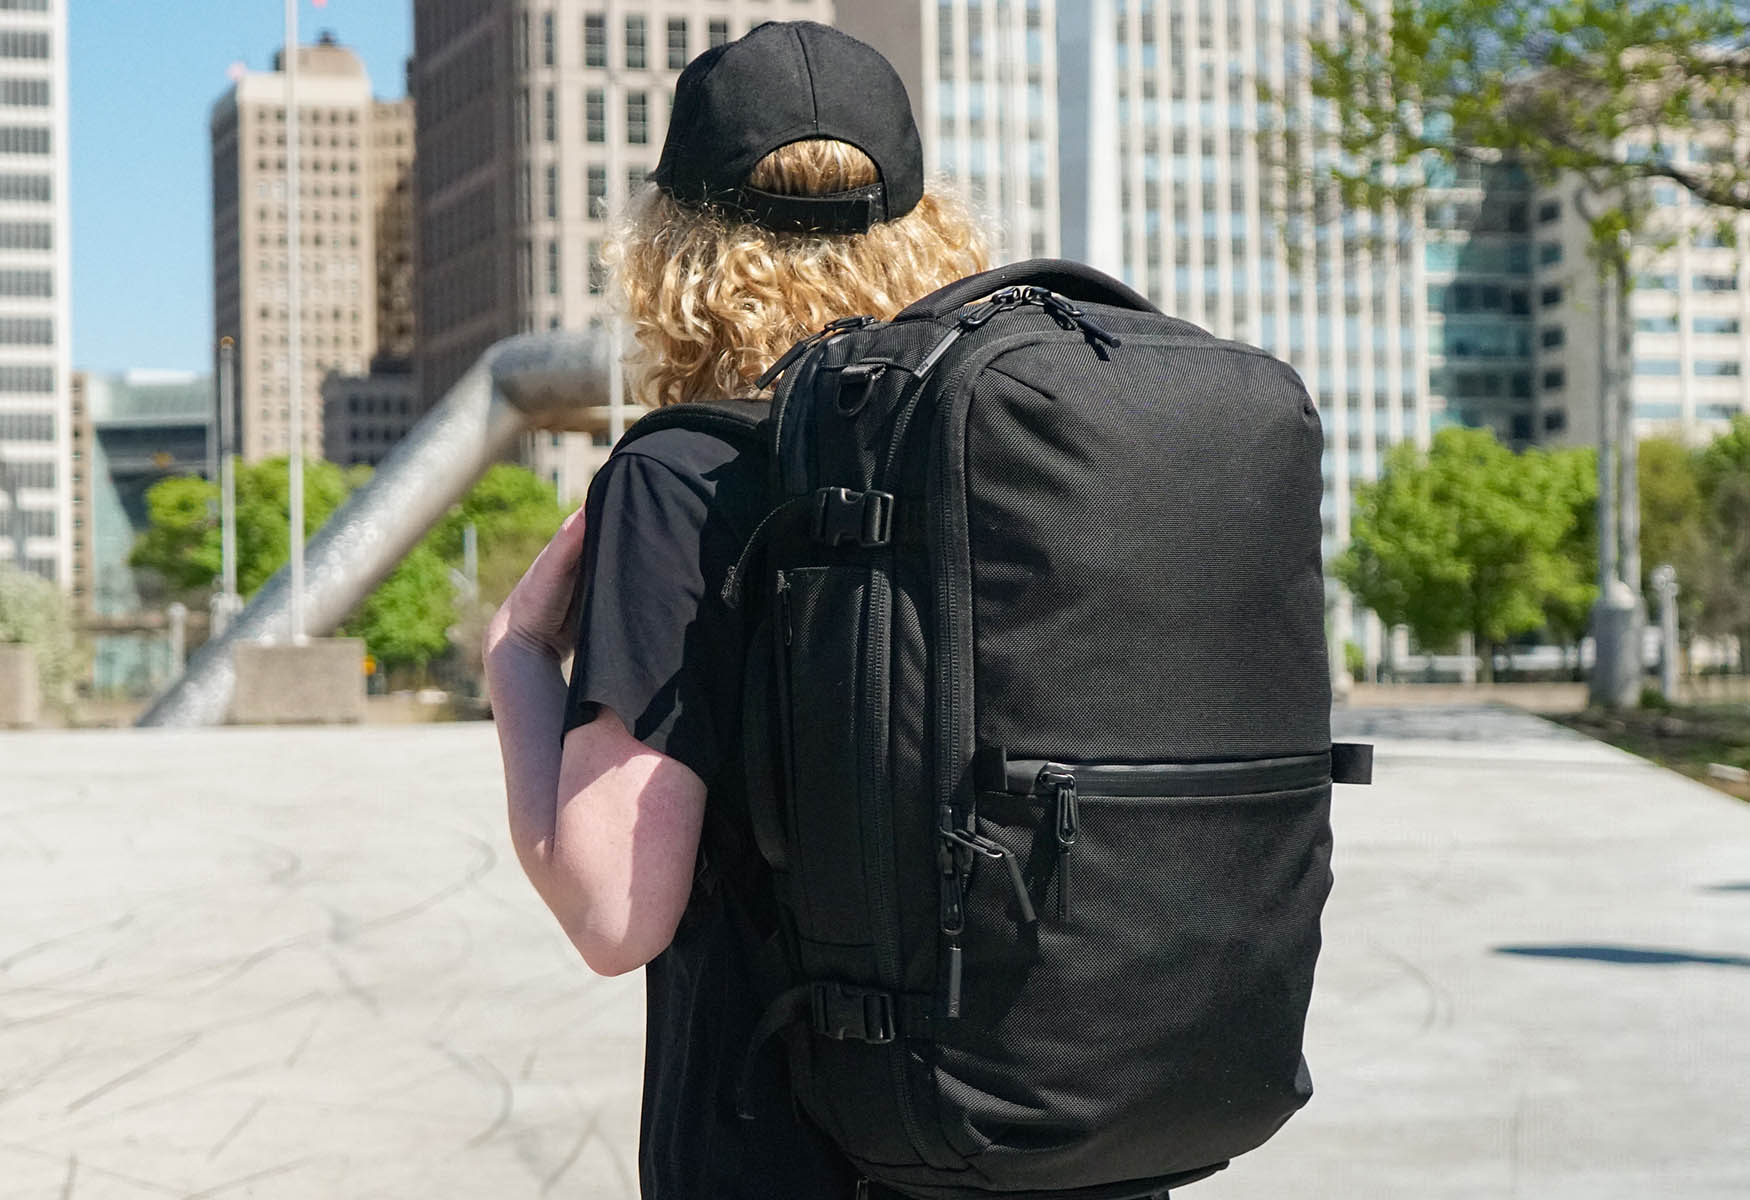 AER Flight Pack 2 Review – Meet The Best Day Pack From AER